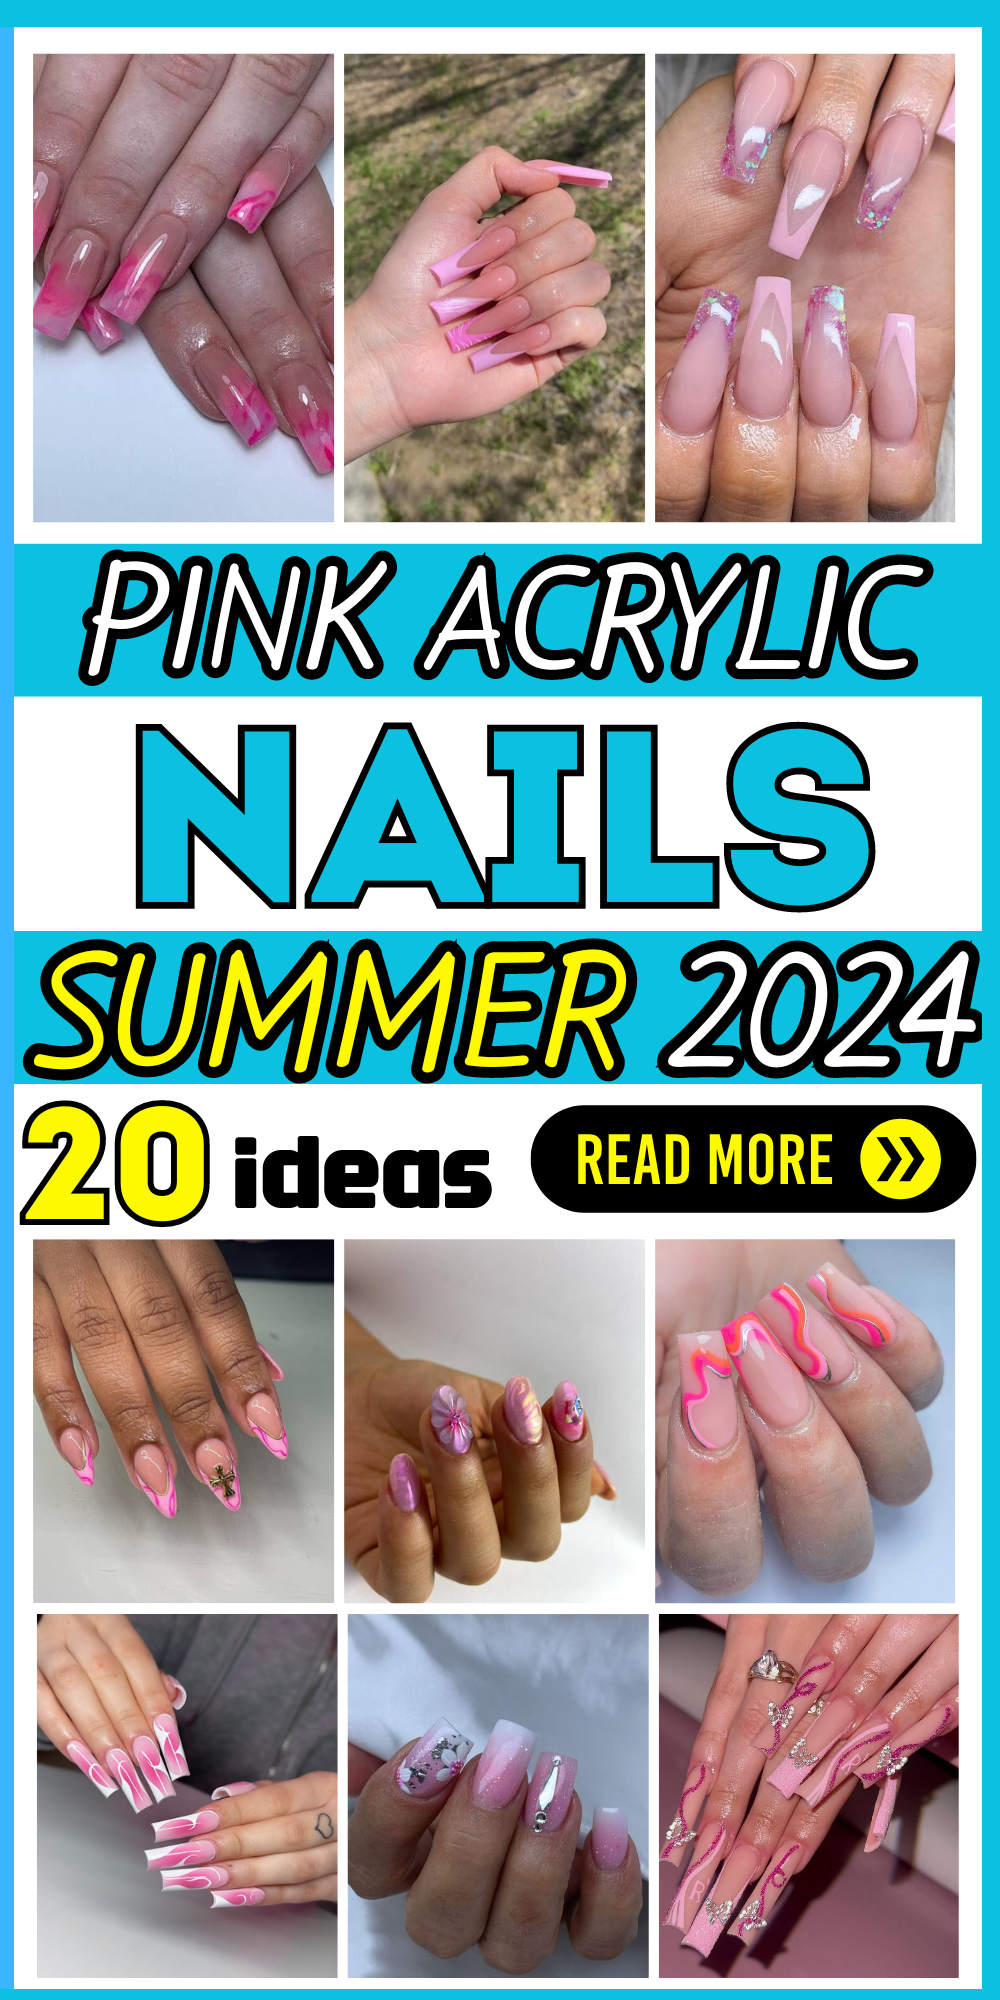 21 Stunning Summer Pink Acrylic Nails: Designs, Ideas, and DIY Tips